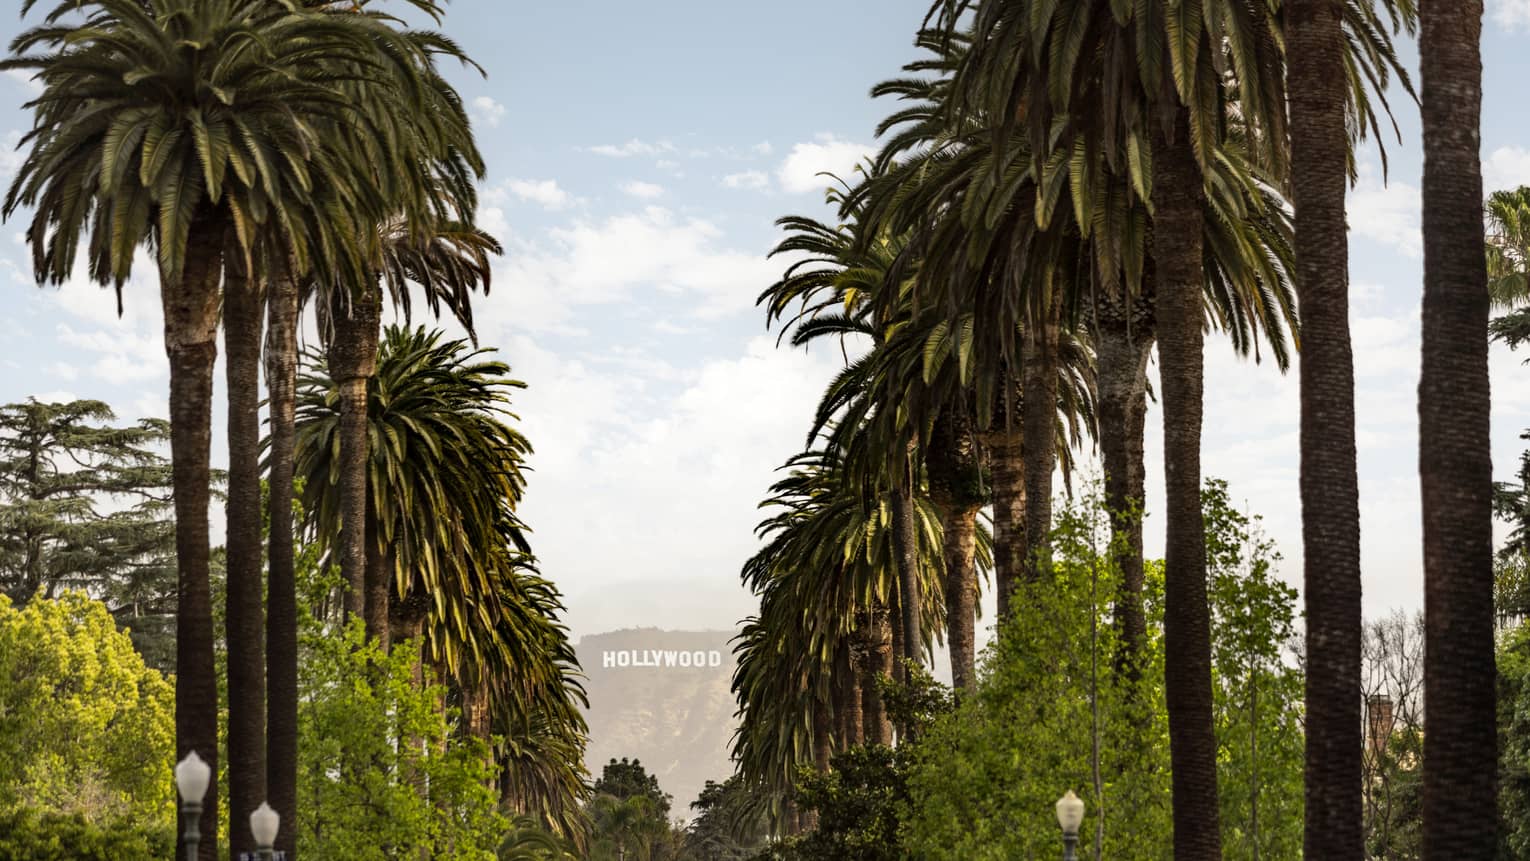 Lines of palm trees with the "Hollywood" sign in the distance.